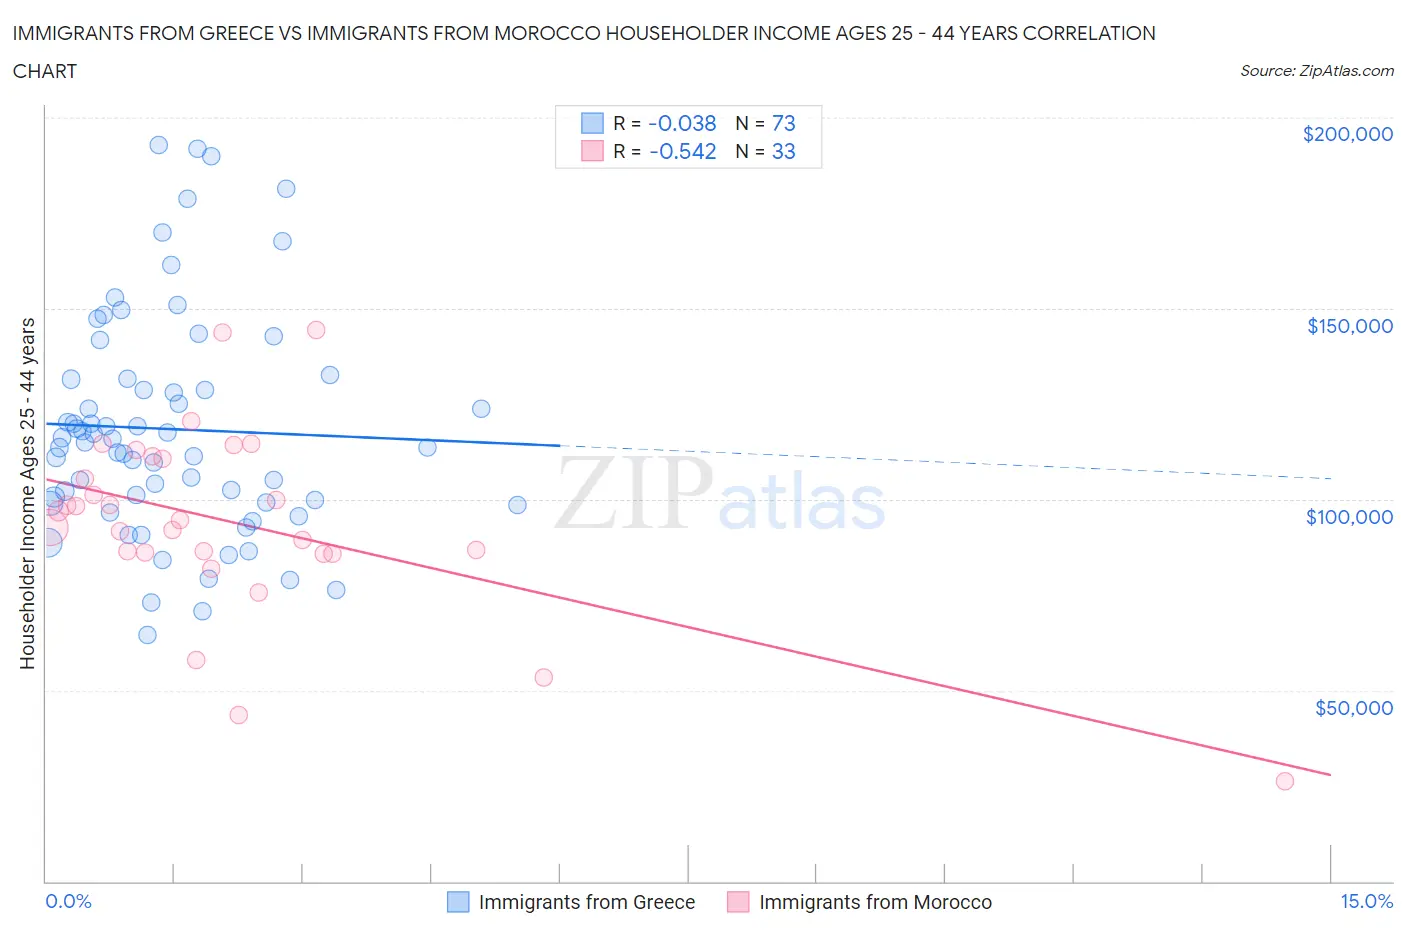 Immigrants from Greece vs Immigrants from Morocco Householder Income Ages 25 - 44 years